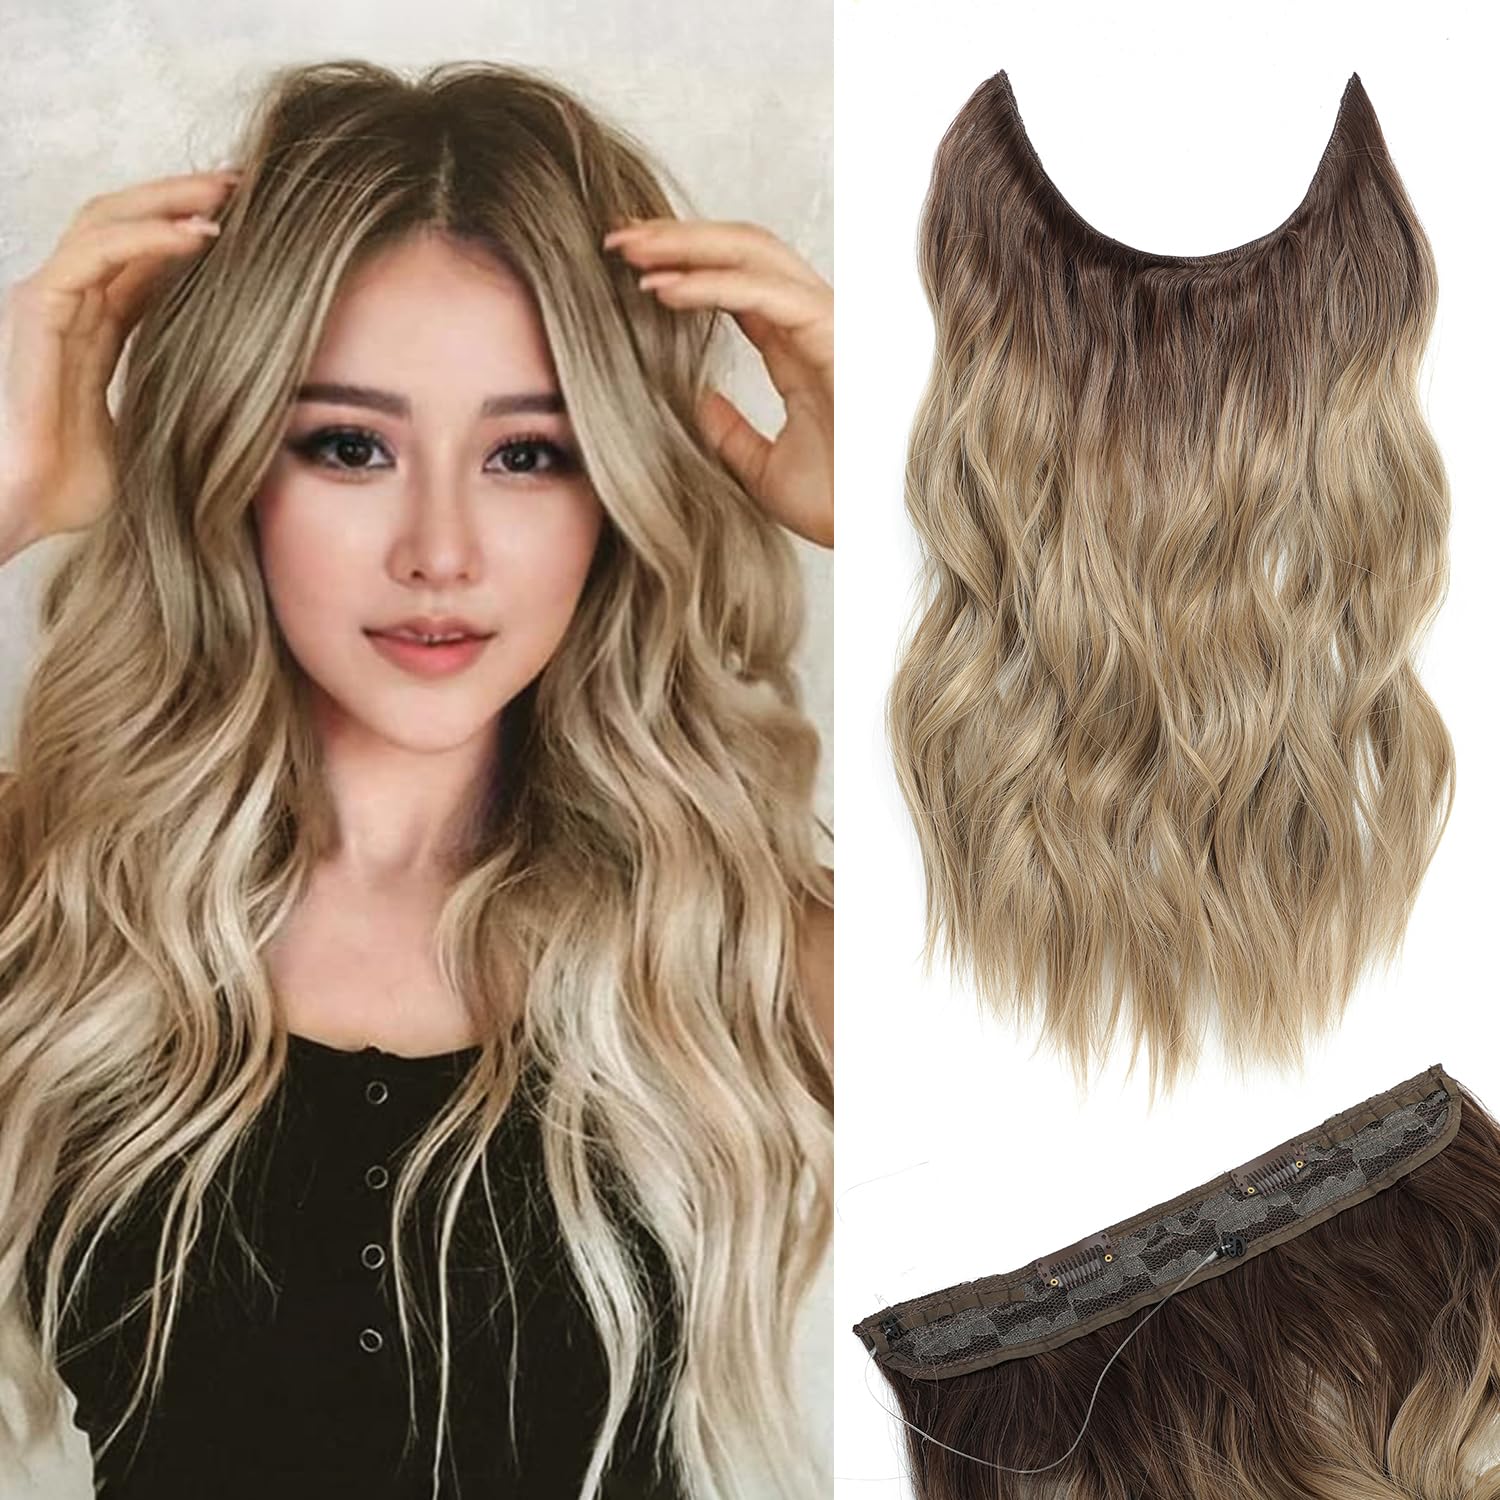 Long Wavy Invisible Wire Hair Extensions Synthetic Hairpiece With  Transparent Wire Adjustable Size,2 Secure Clips Light Ash Brown With Blonde  Highlights Hair Extension For Women